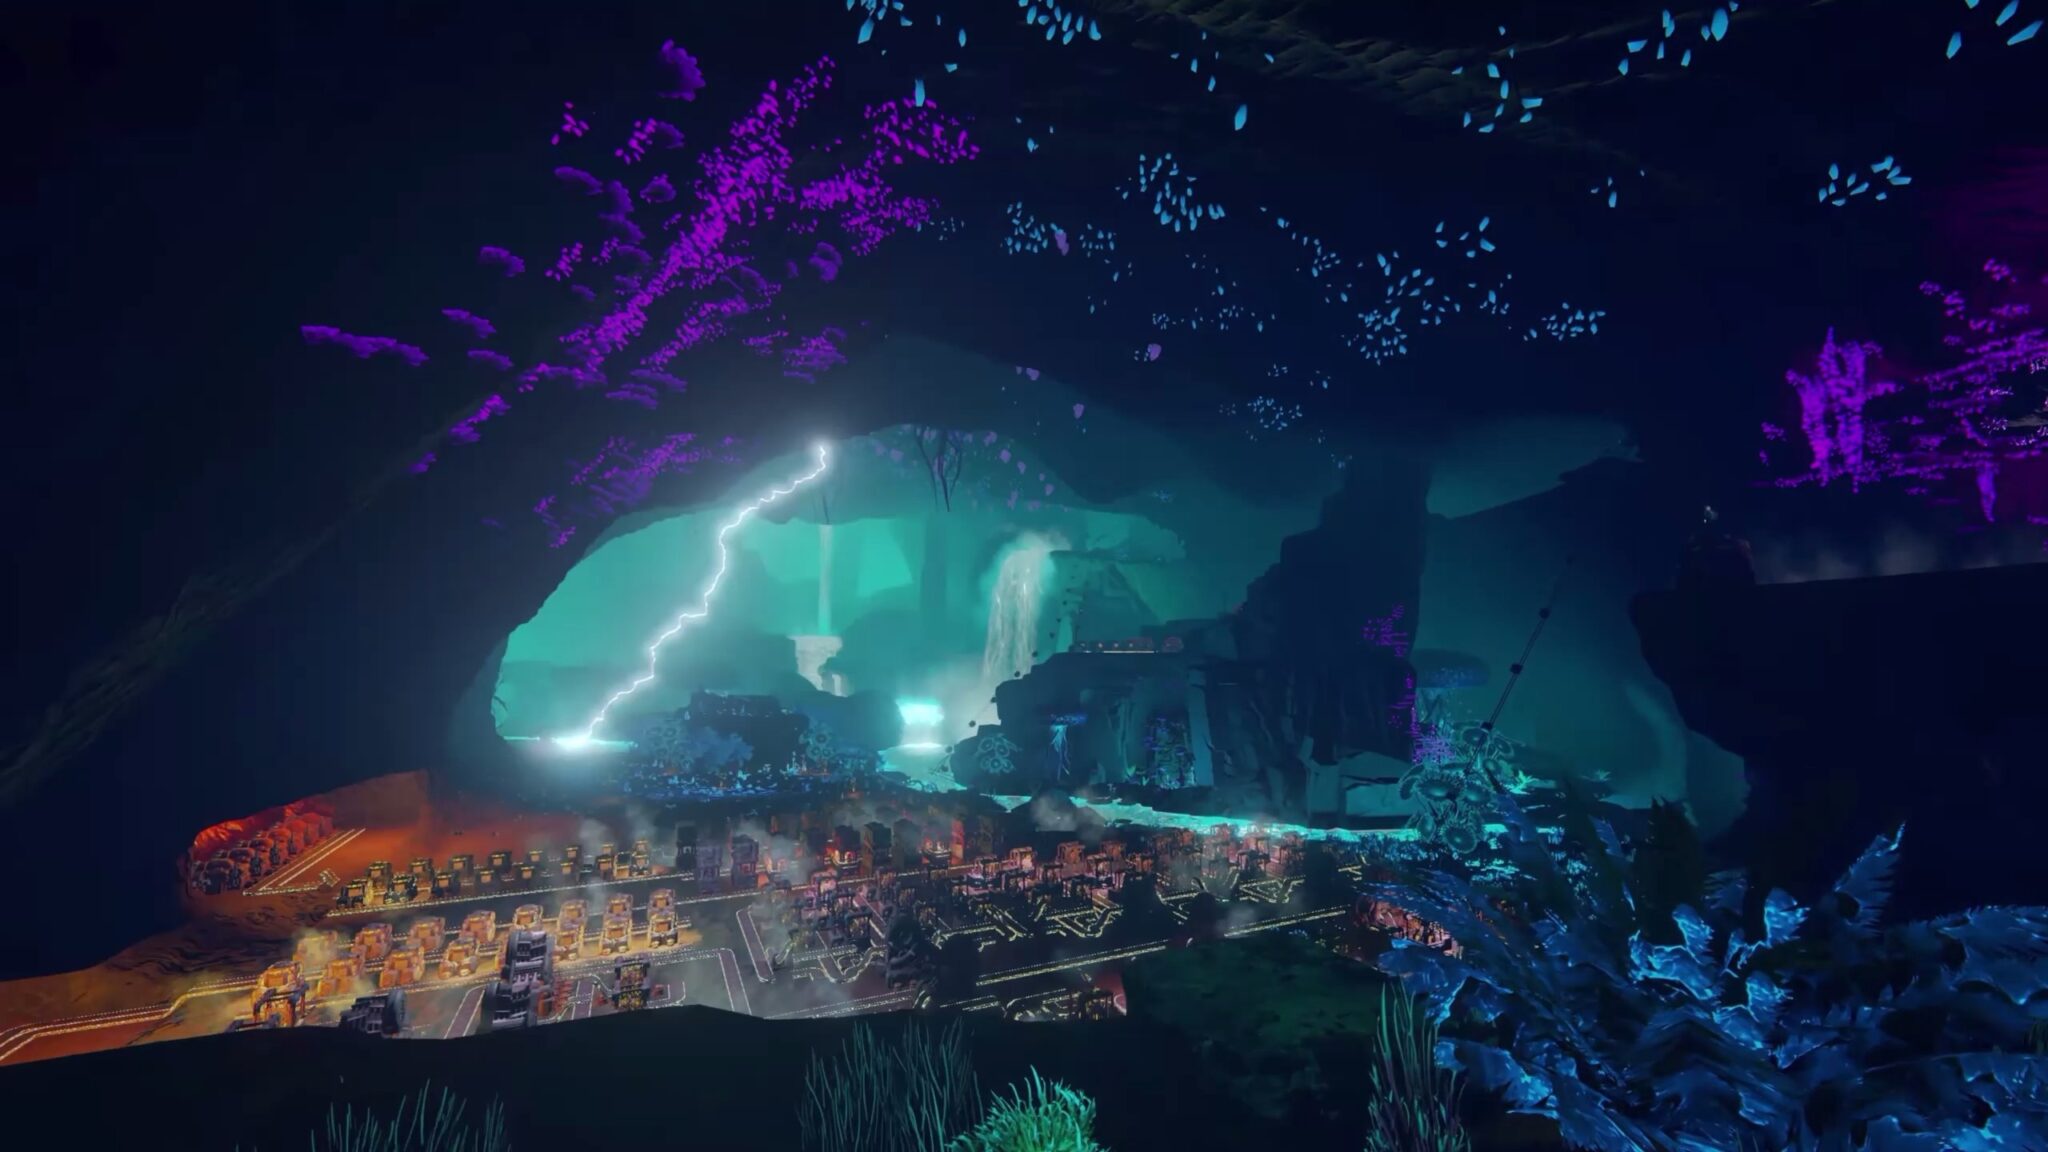 (Techtonica's underground caverns are reminiscent of Skyrim's Blackreach cavern. The lightning in the background suggests weather phenomena and disasters).